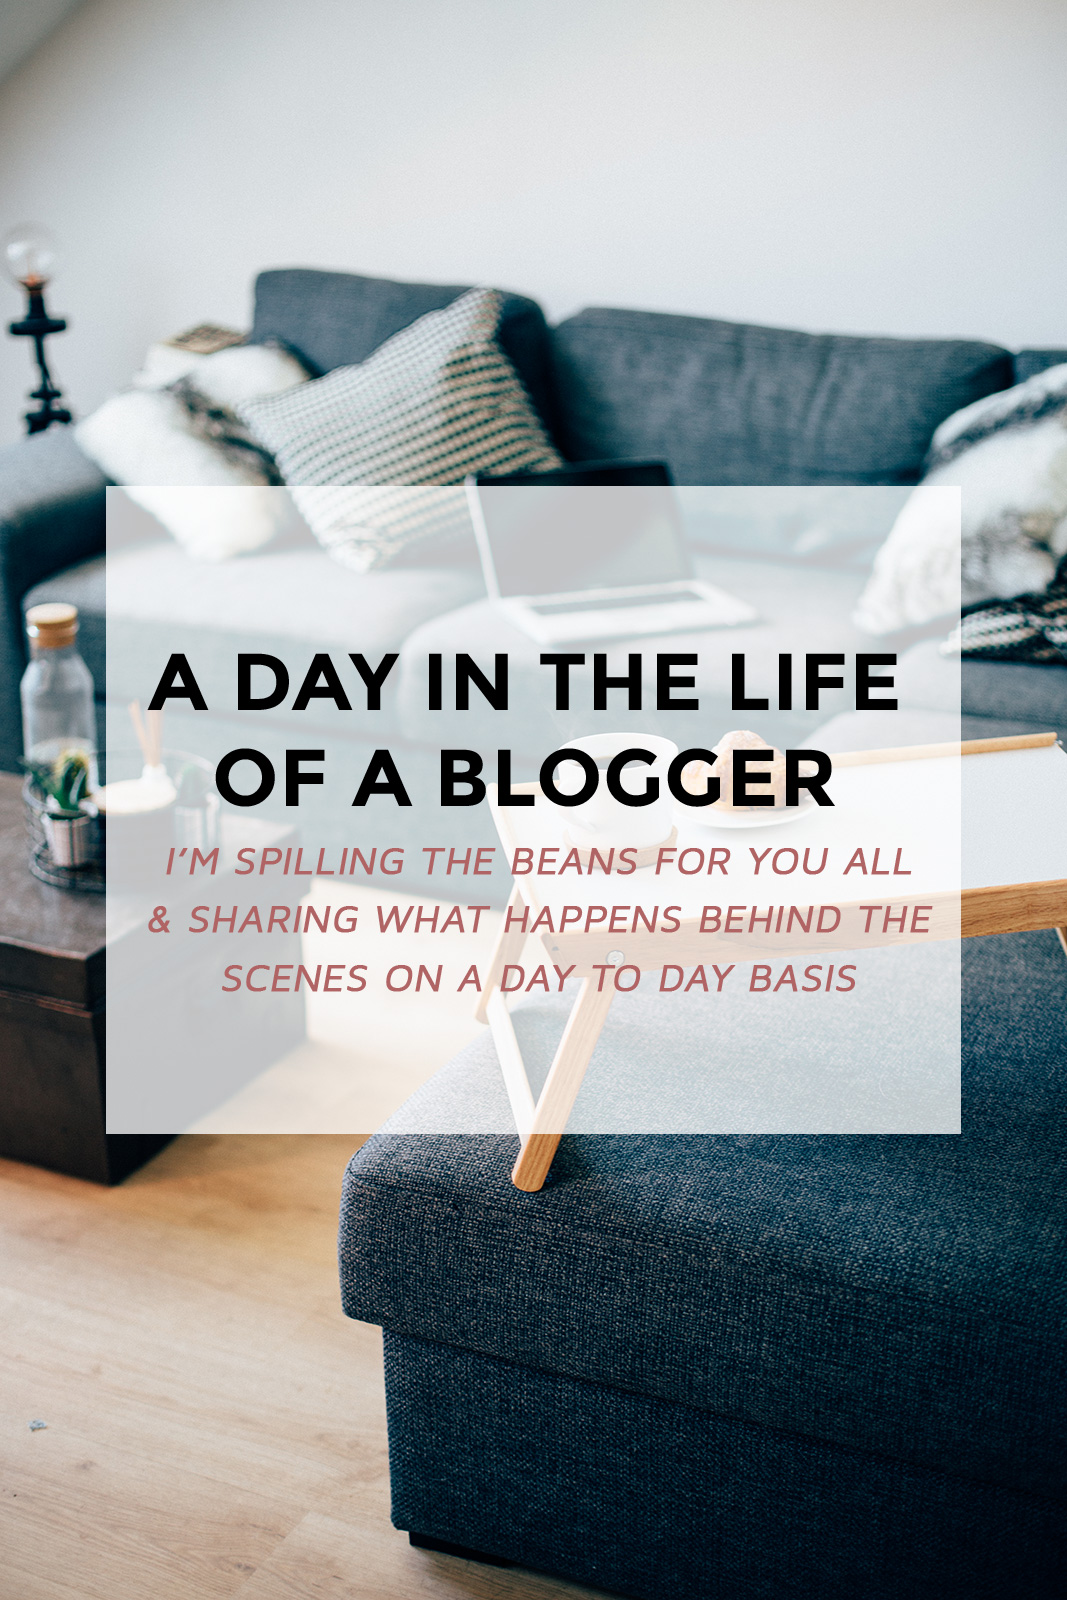 It's always fun to see people's reaction when I tell them I'm a blogger. Most of those people assume I spend my days on facebook, shopping online and have no idea how I make my living. Don't worry, things don't come easy for me too! Thus today, I'm spilling the beans for you all & sharing what happens behind the scenes on a day to day basis.